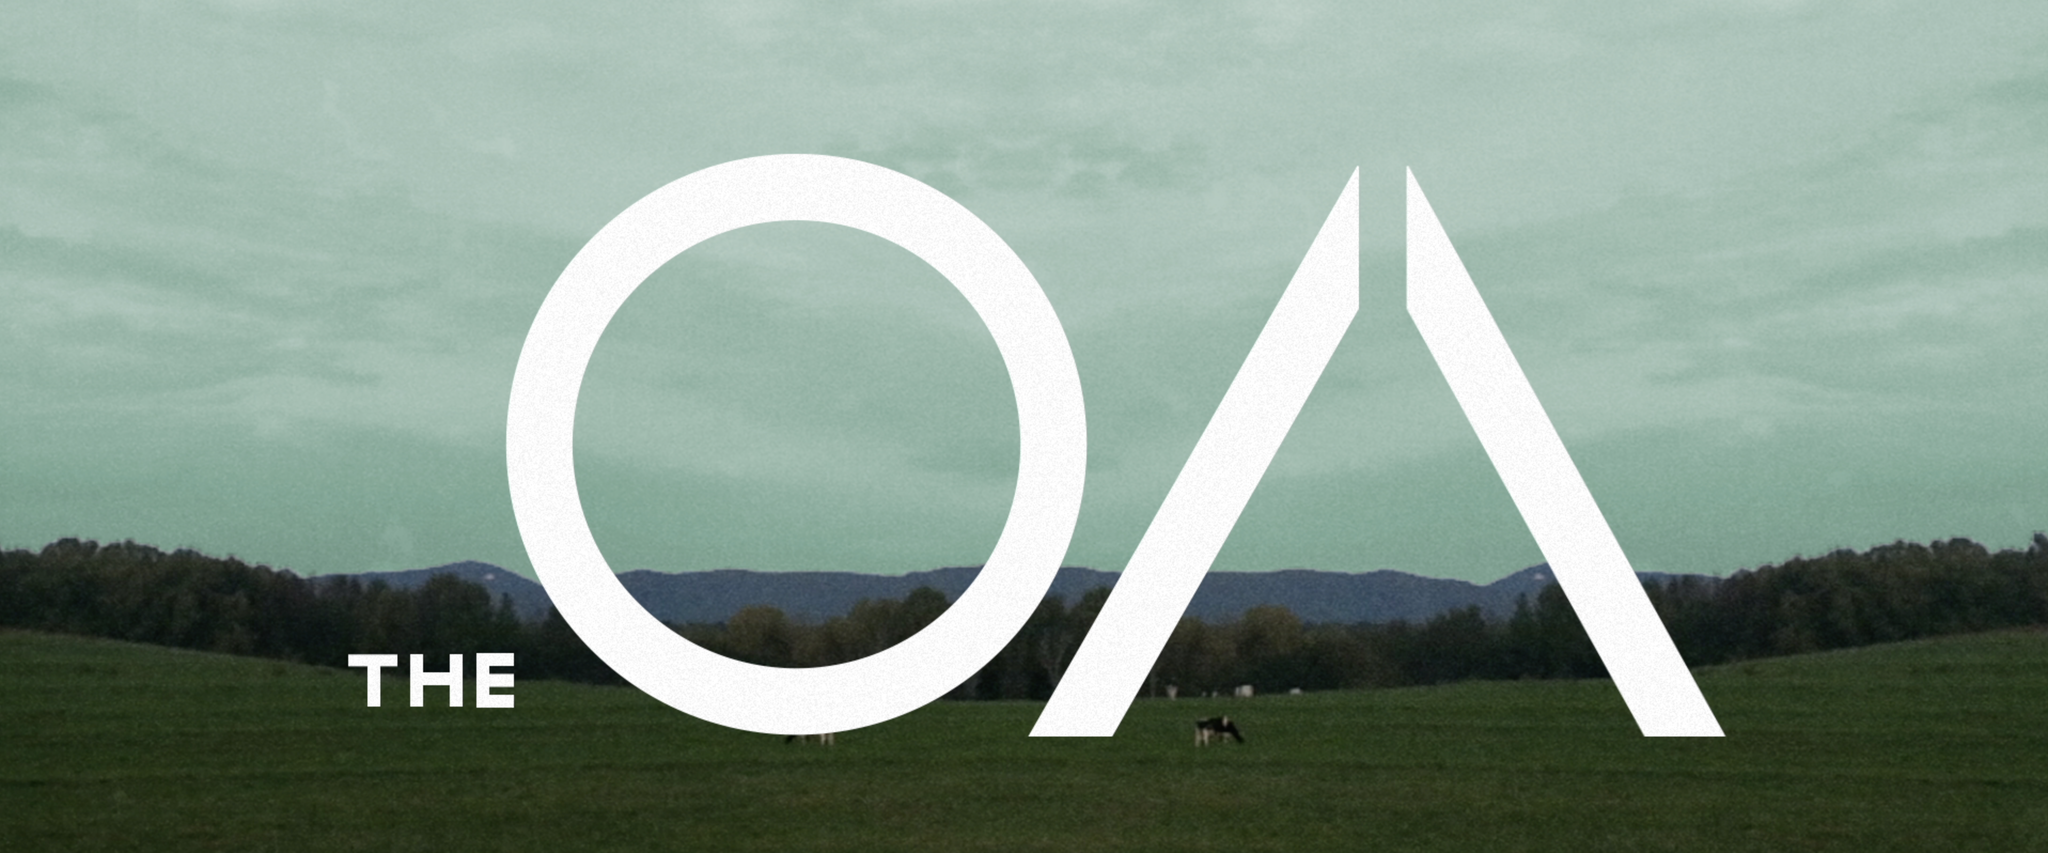 The OA Title Sequence — DELANEY TRIONE